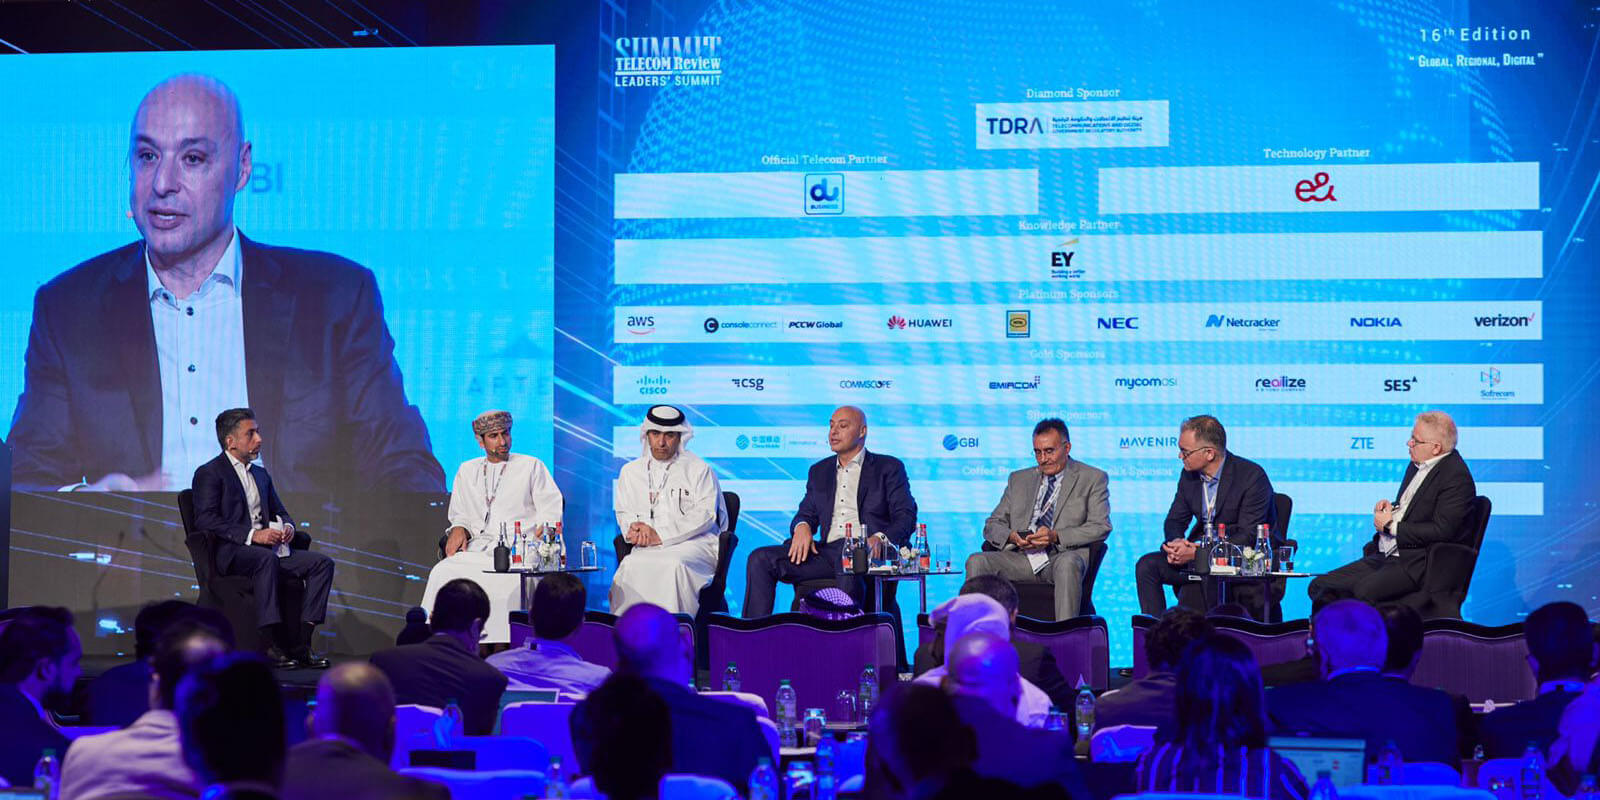 The ICT Leaders’ Panel